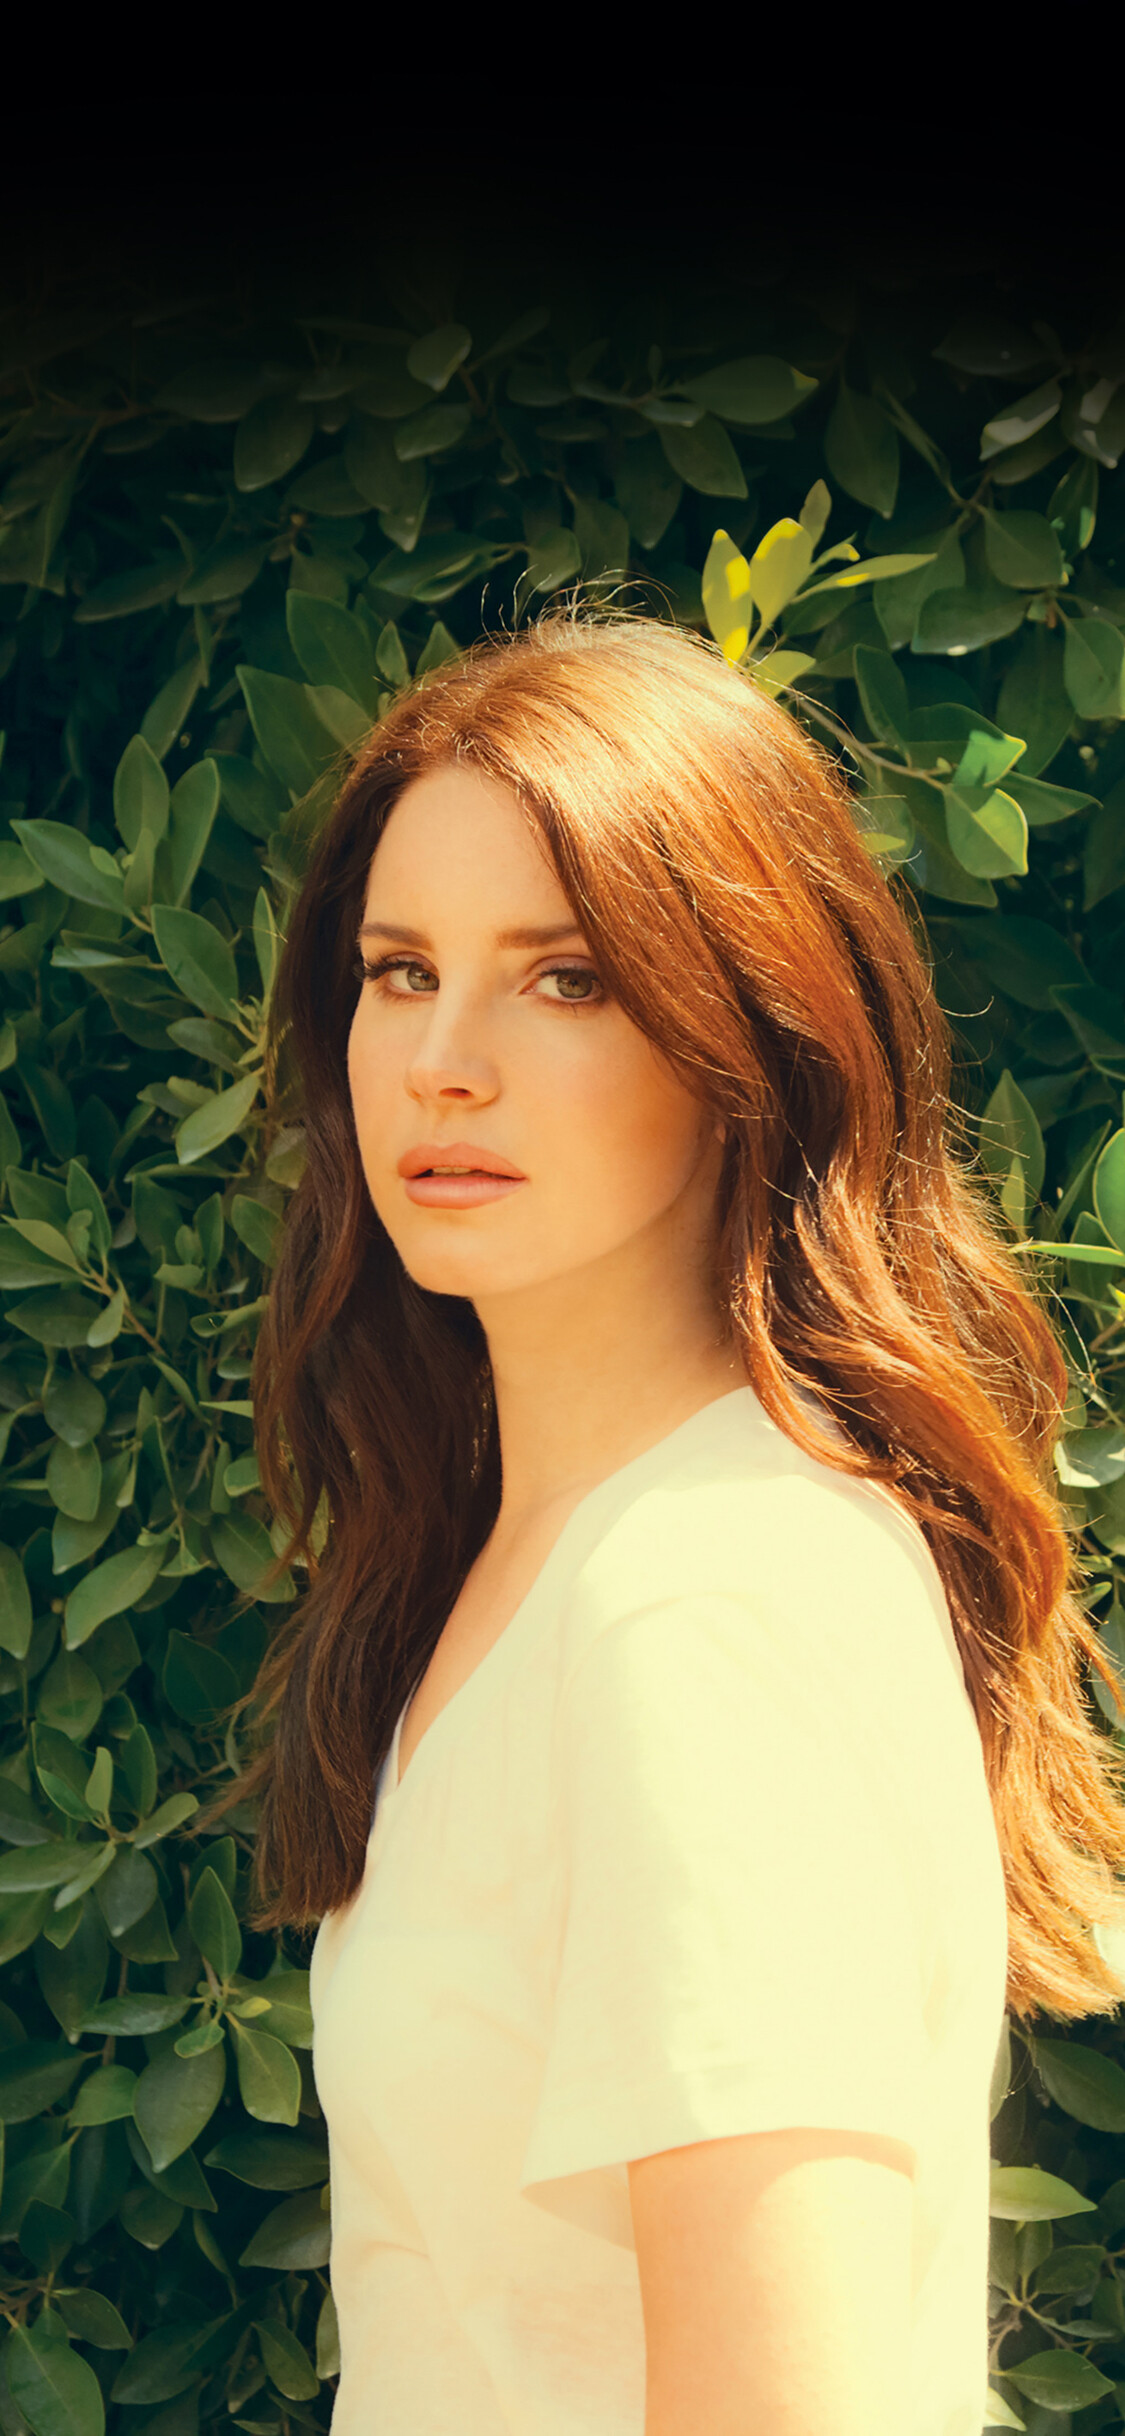 Lana Del Rey: Recording a version of the song “Once Upon a Dream” for Maleficent, 2014. 1130x2440 HD Wallpaper.